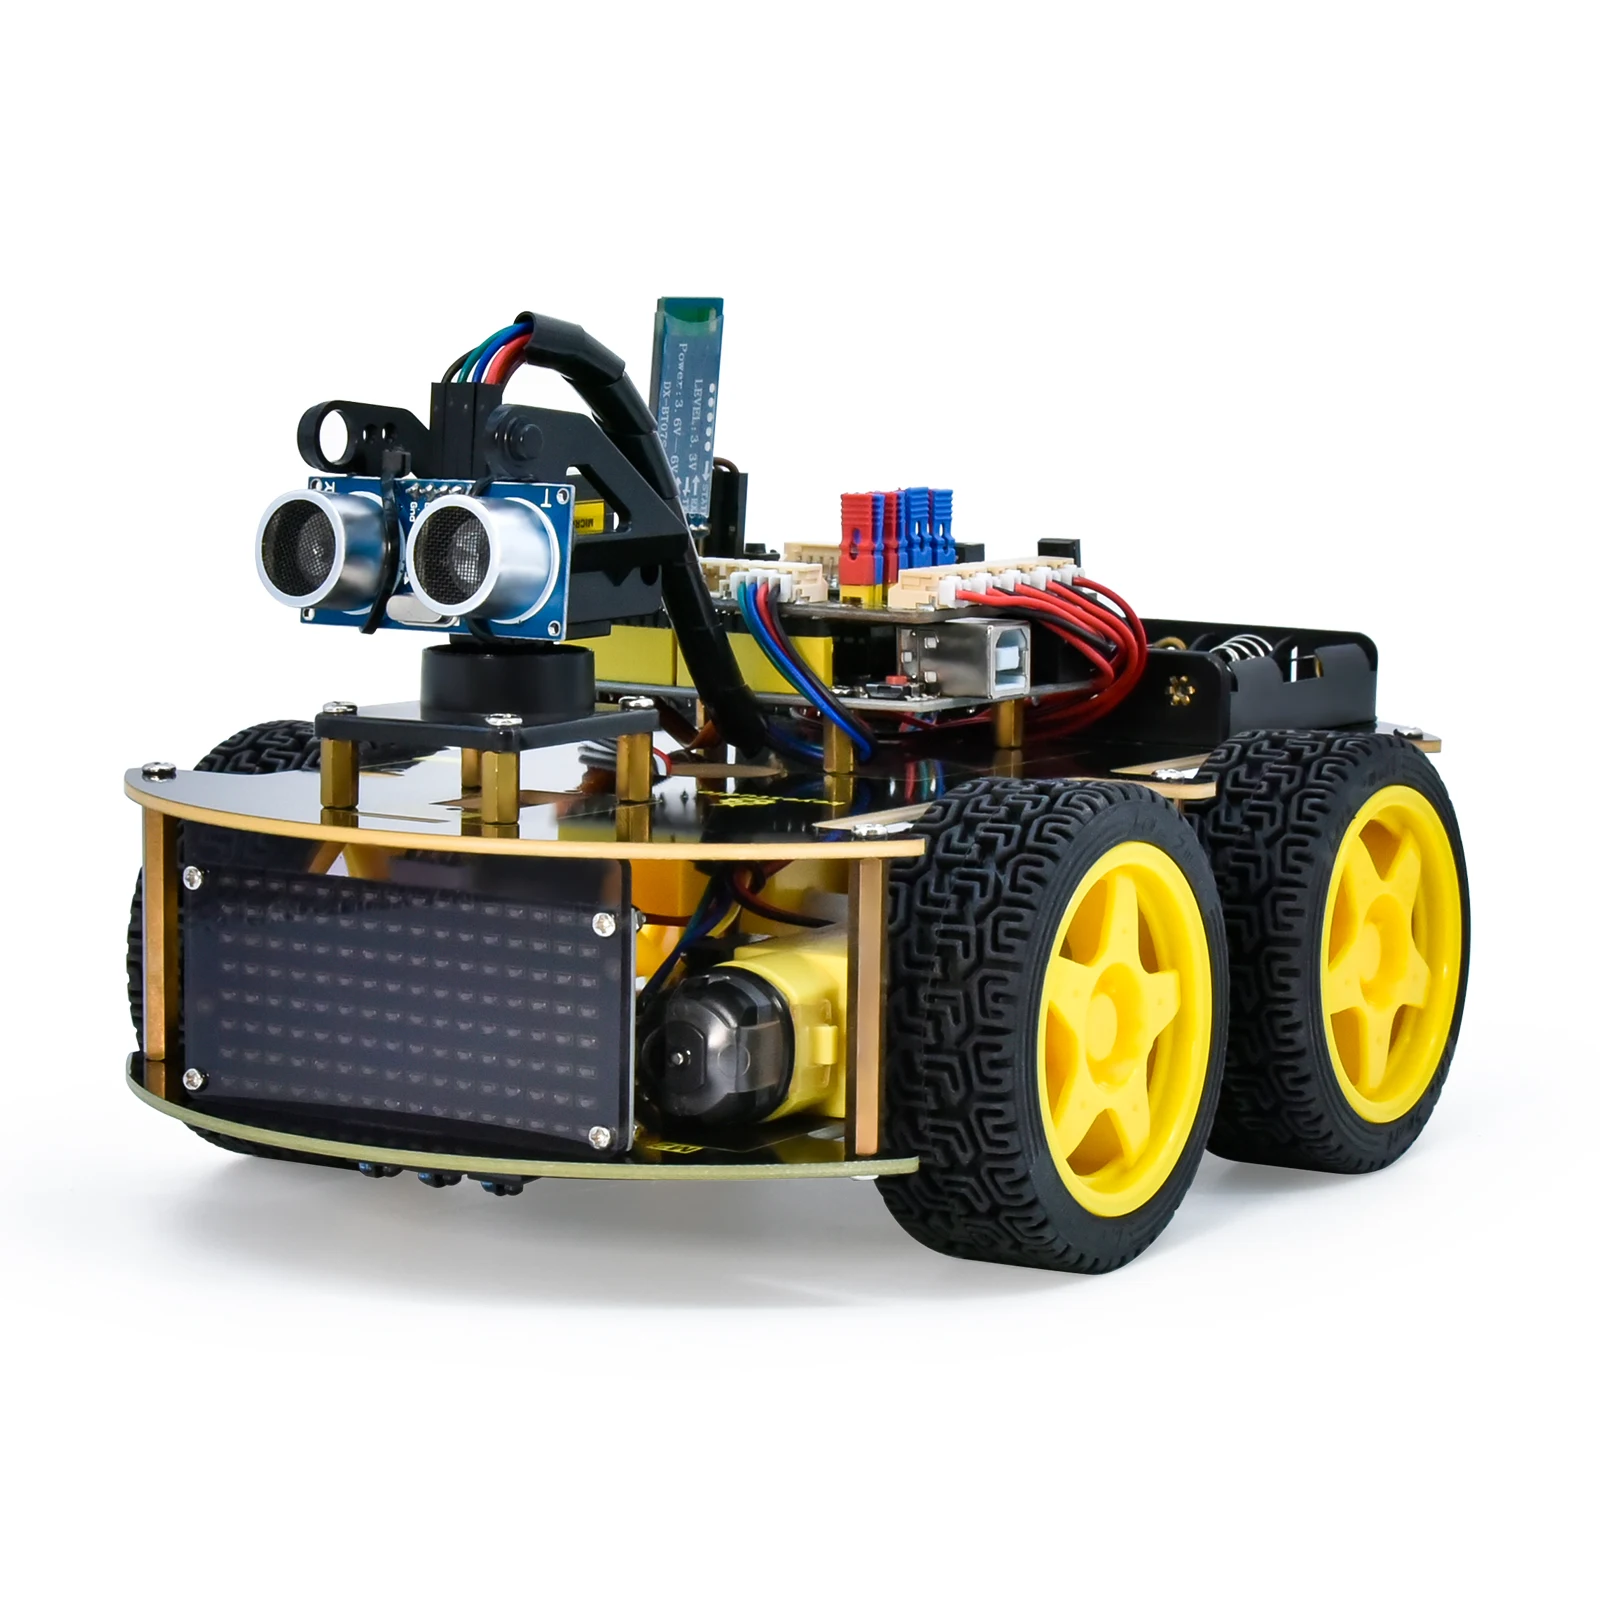 High Quality Upgraded V2.0 Electronic Bluetooth-compatible Robot Car Kit For Arduino Buy For Arduino Robot 4wd,4wd Bluetooth-compatible Robot Car,For Arduino Robot Kit Product Alibaba.com